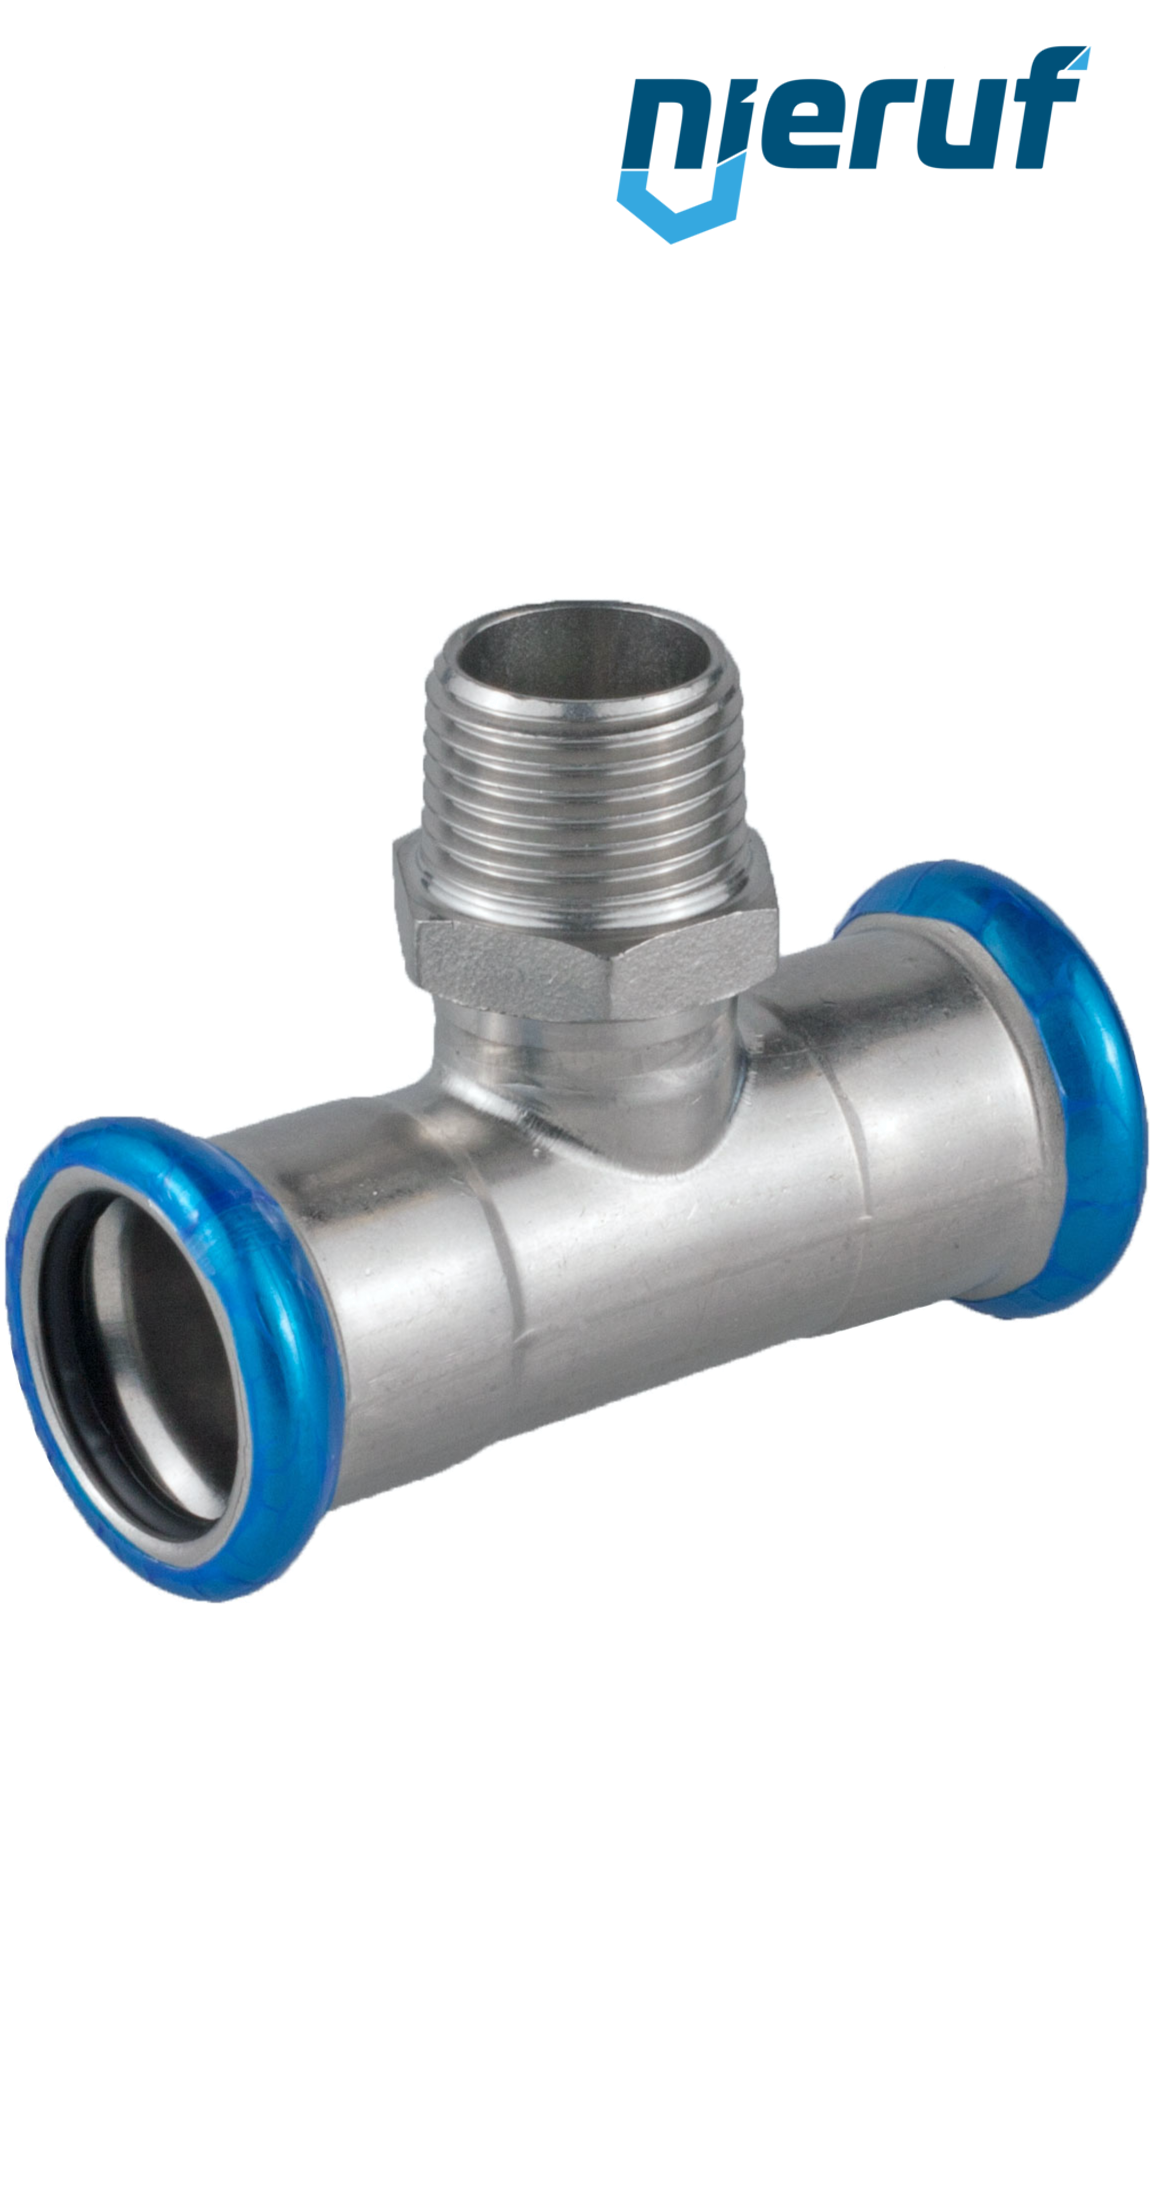 T-fitting Pressfitting F x F DN20 - 22,0 mm male thread 3/4" inch stainless steel